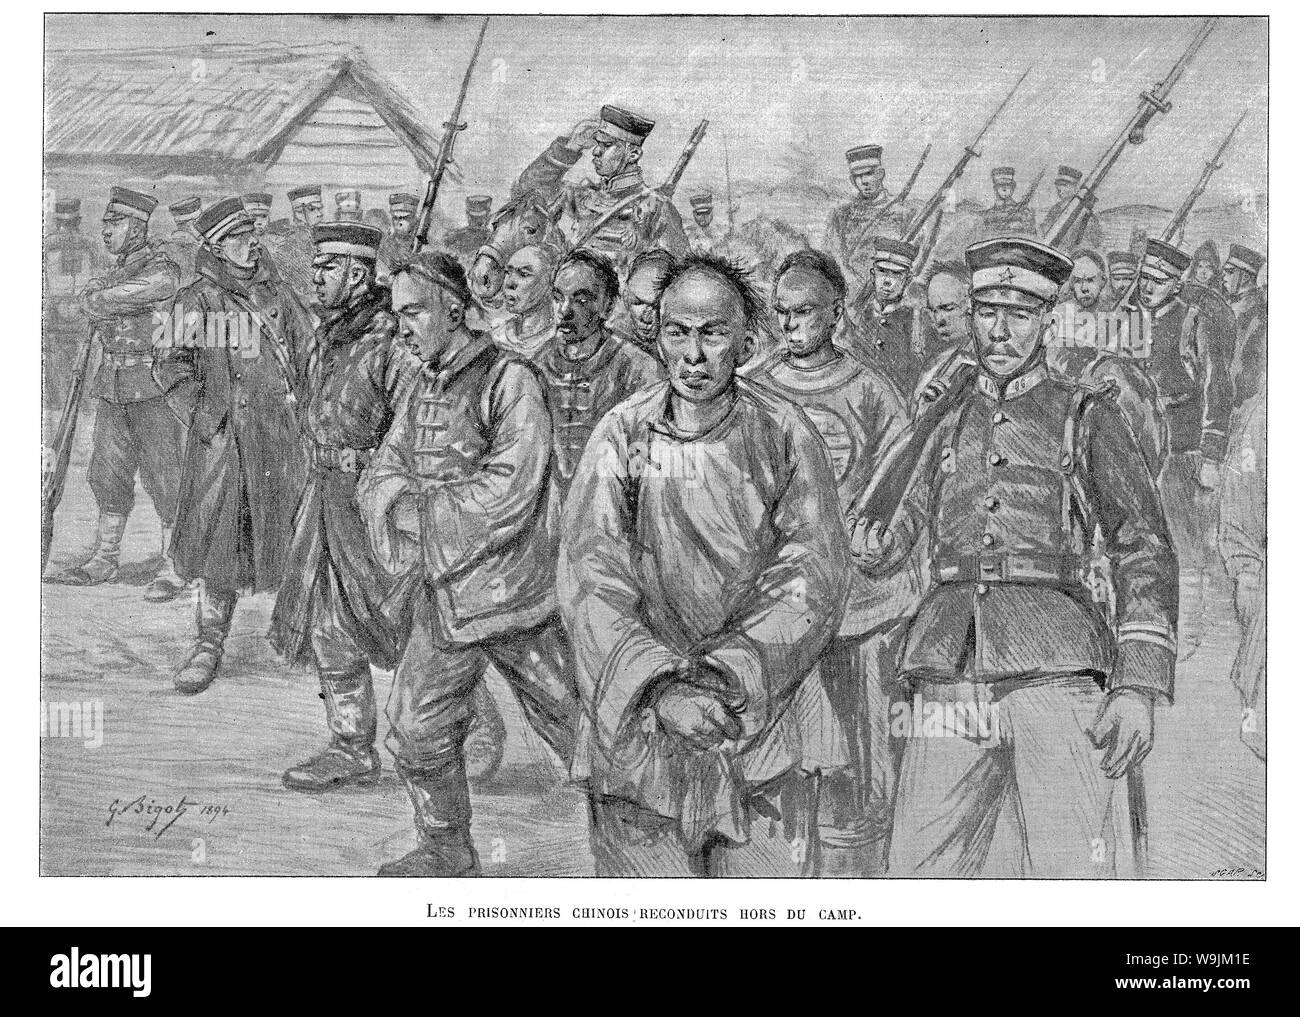 [ 1890s Japan - First Sino-Japanese War (1894–1895) ] —   Japanese imperial troops Chinese prisoners during the First Sino-Japanese War (1894–1895).  Published in the French illustrated weekly Le Monde illustré on March 9, 1895 (Meiji 28). Art by French artist Georges Ferdinand Bigot (1860-1927), famous for his satirical cartoons of life in Meiji period Japan.  19th century vintage newspaper illustration. Stock Photo